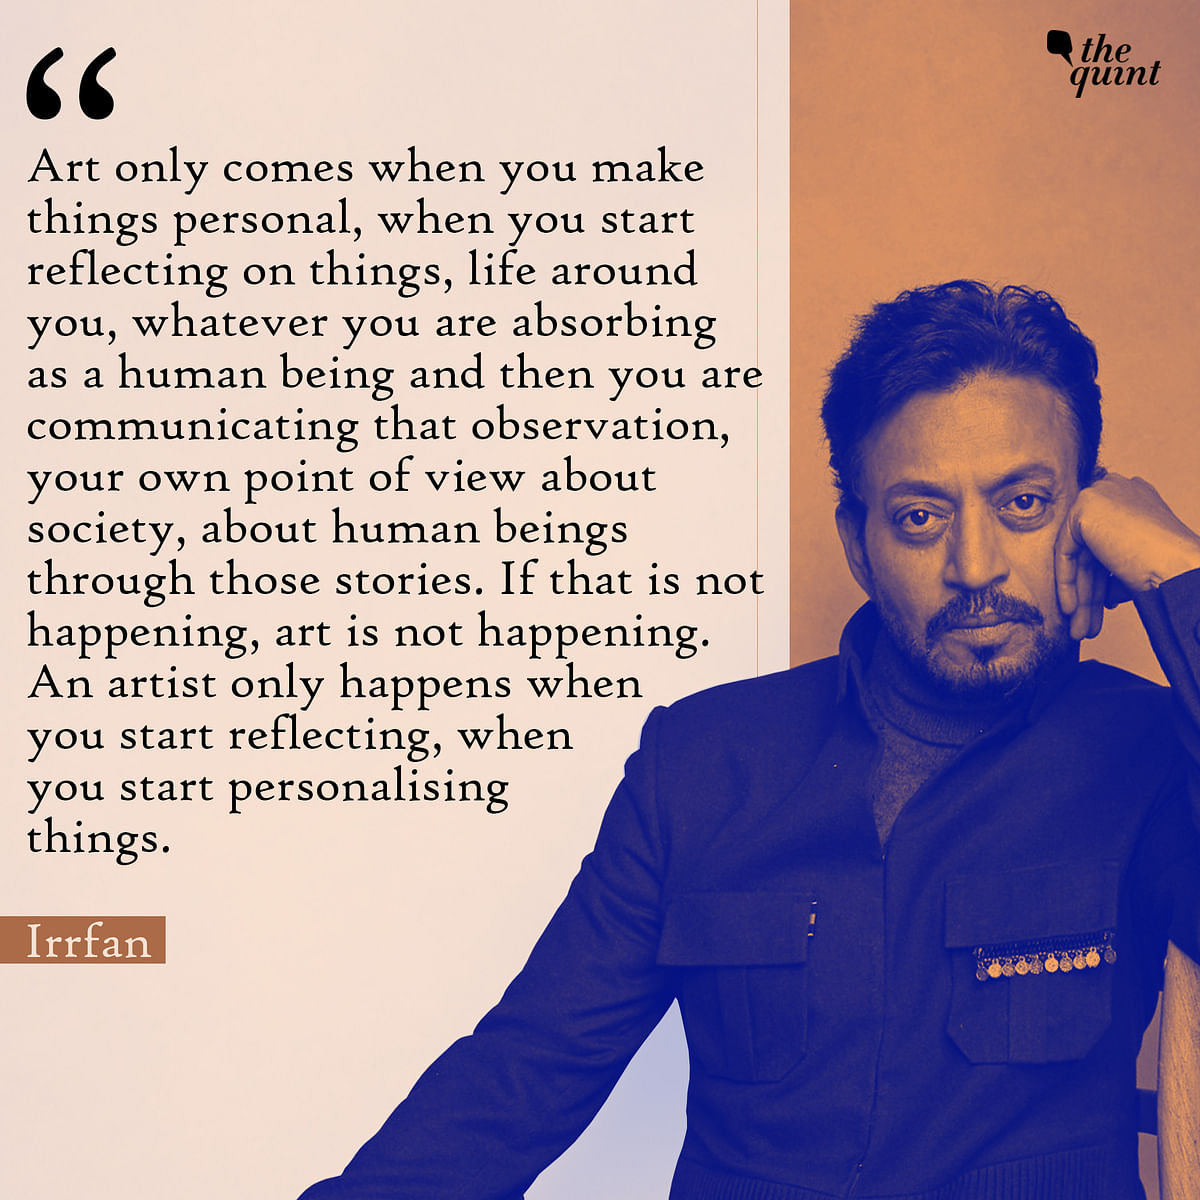 Here are some of Irrfan Khan’s words of wisdom.